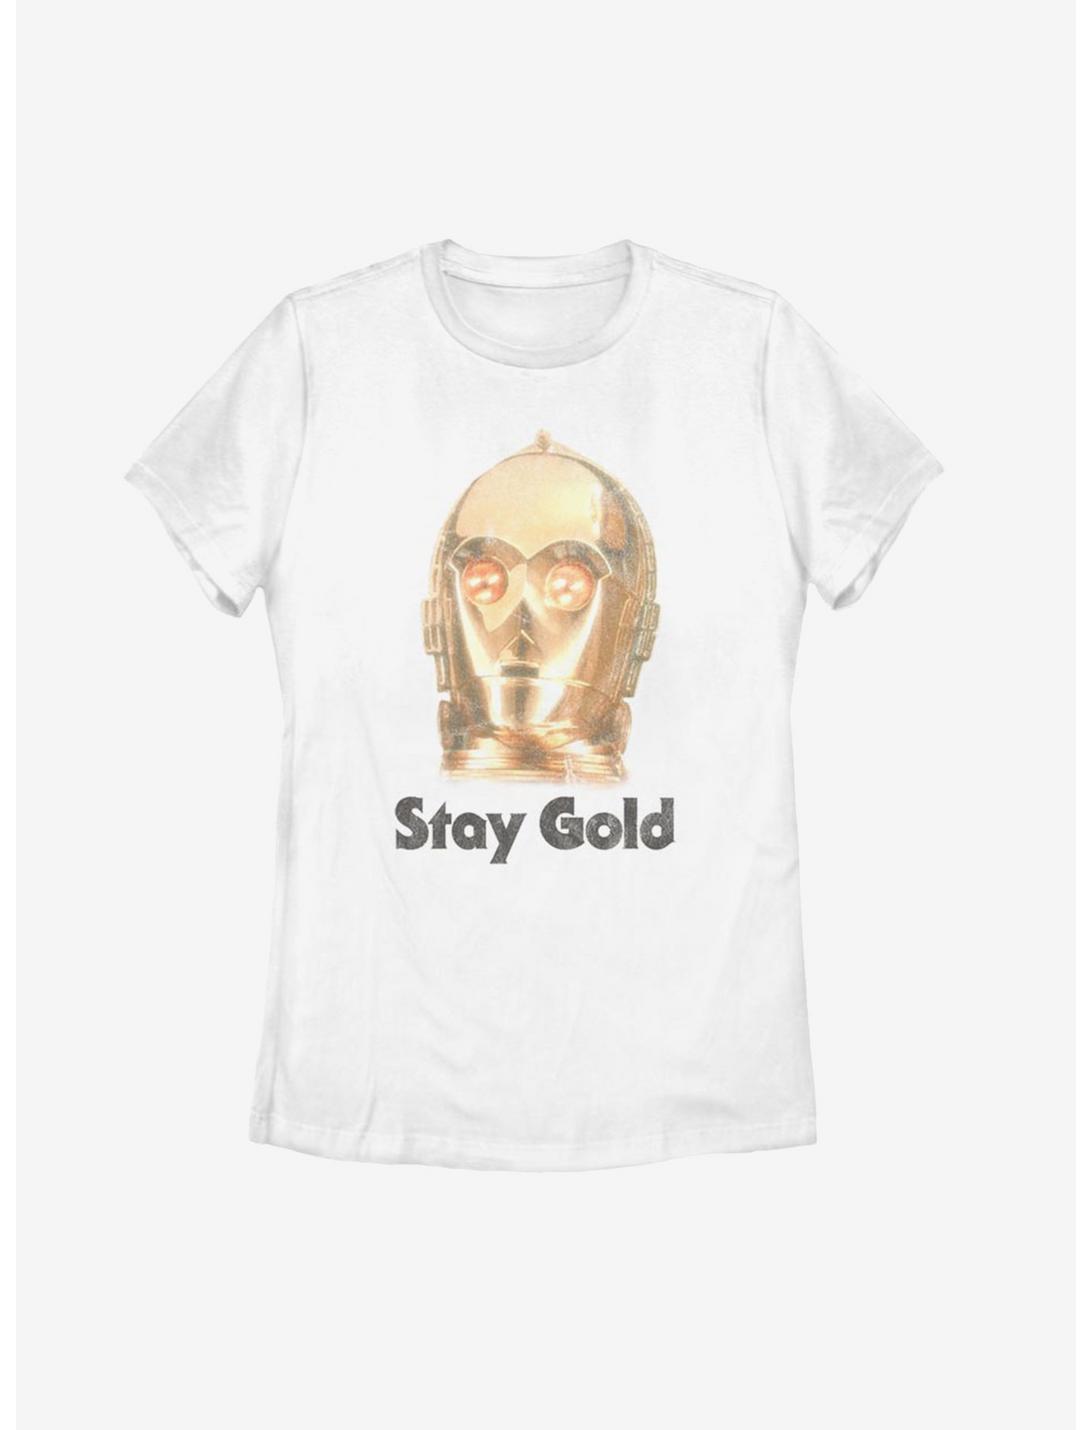 Star Wars Episode IX The Rise Of Skywalker Stay Gold Womens T-Shirt, WHITE, hi-res